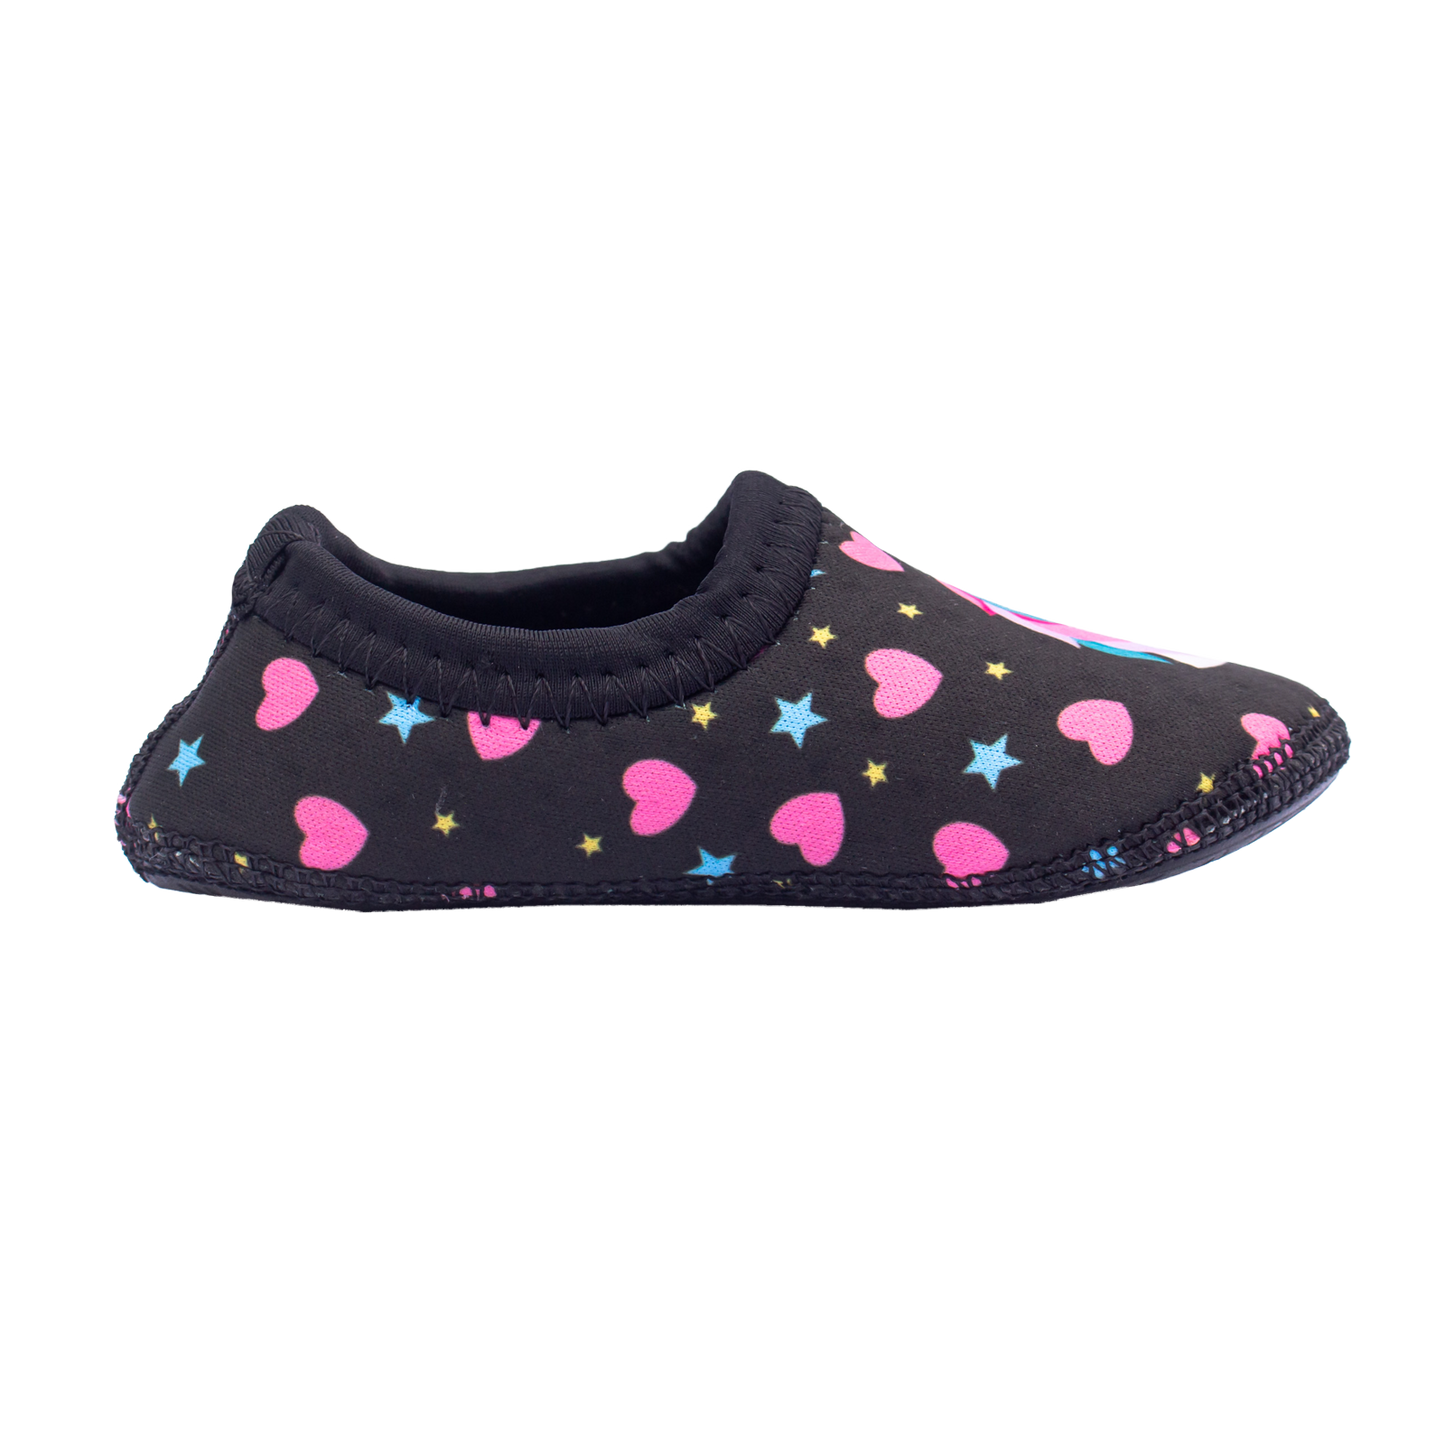 Ufrog Water Shoes - Fit Unicorn